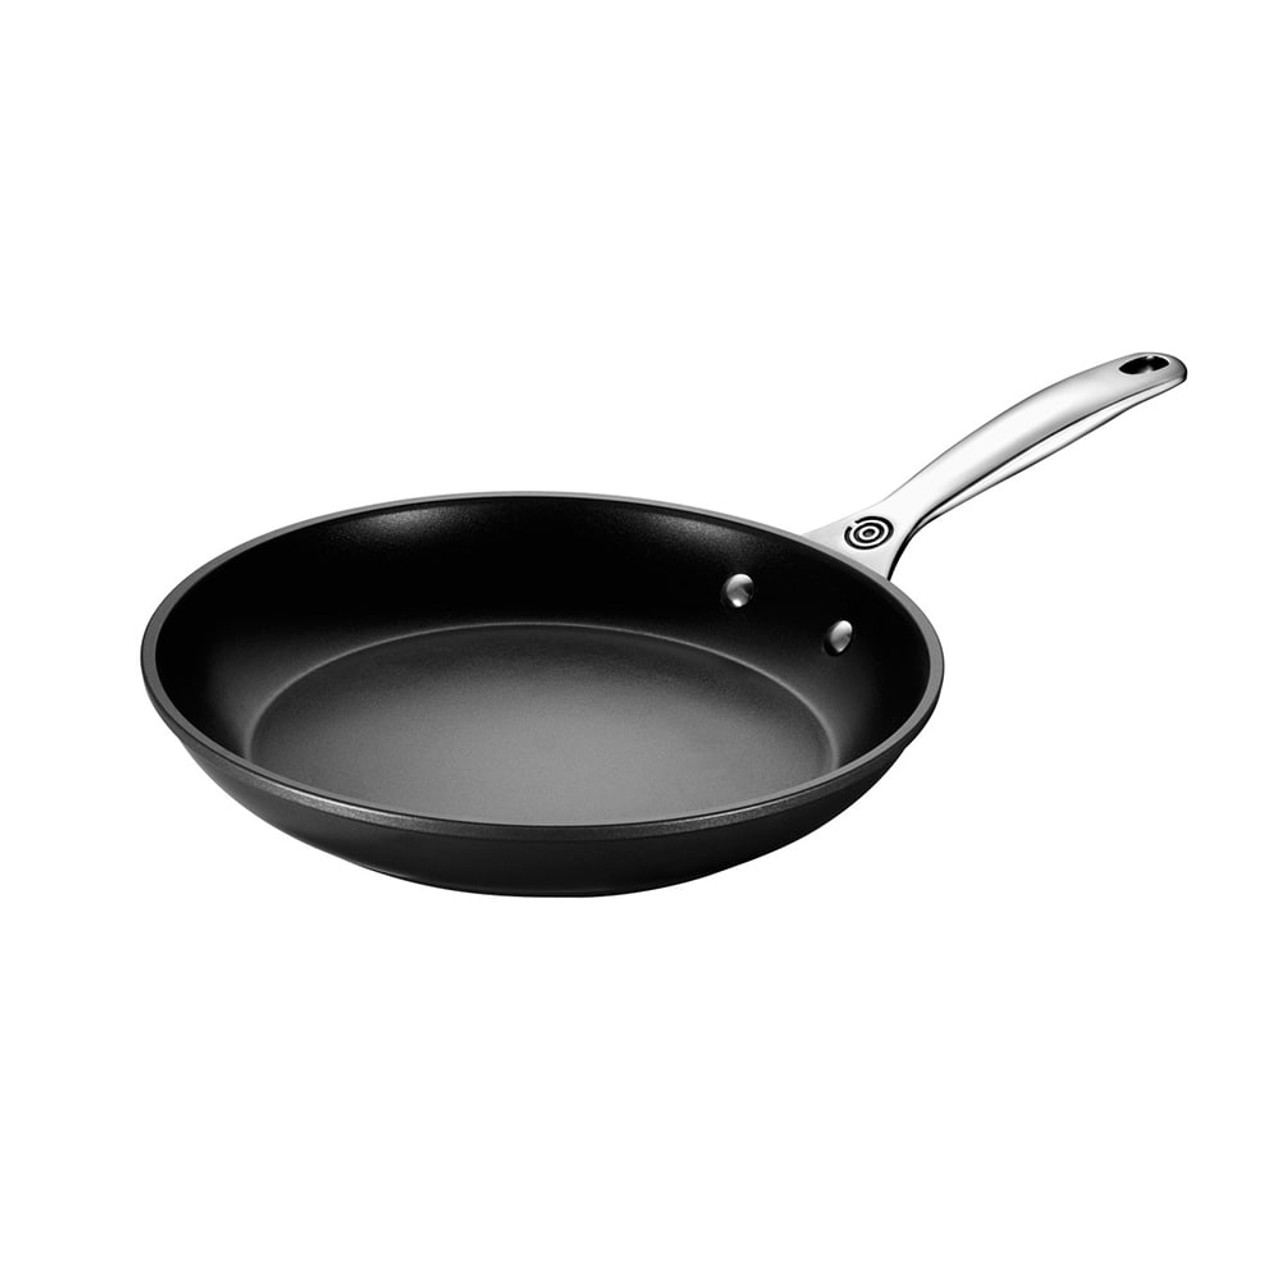 https://cdn11.bigcommerce.com/s-hccytny0od/images/stencil/1280x1280/products/3304/11831/le-creuset-tns-pro-fry-pan-10in__62555.1592344340.jpg?c=2?imbypass=on